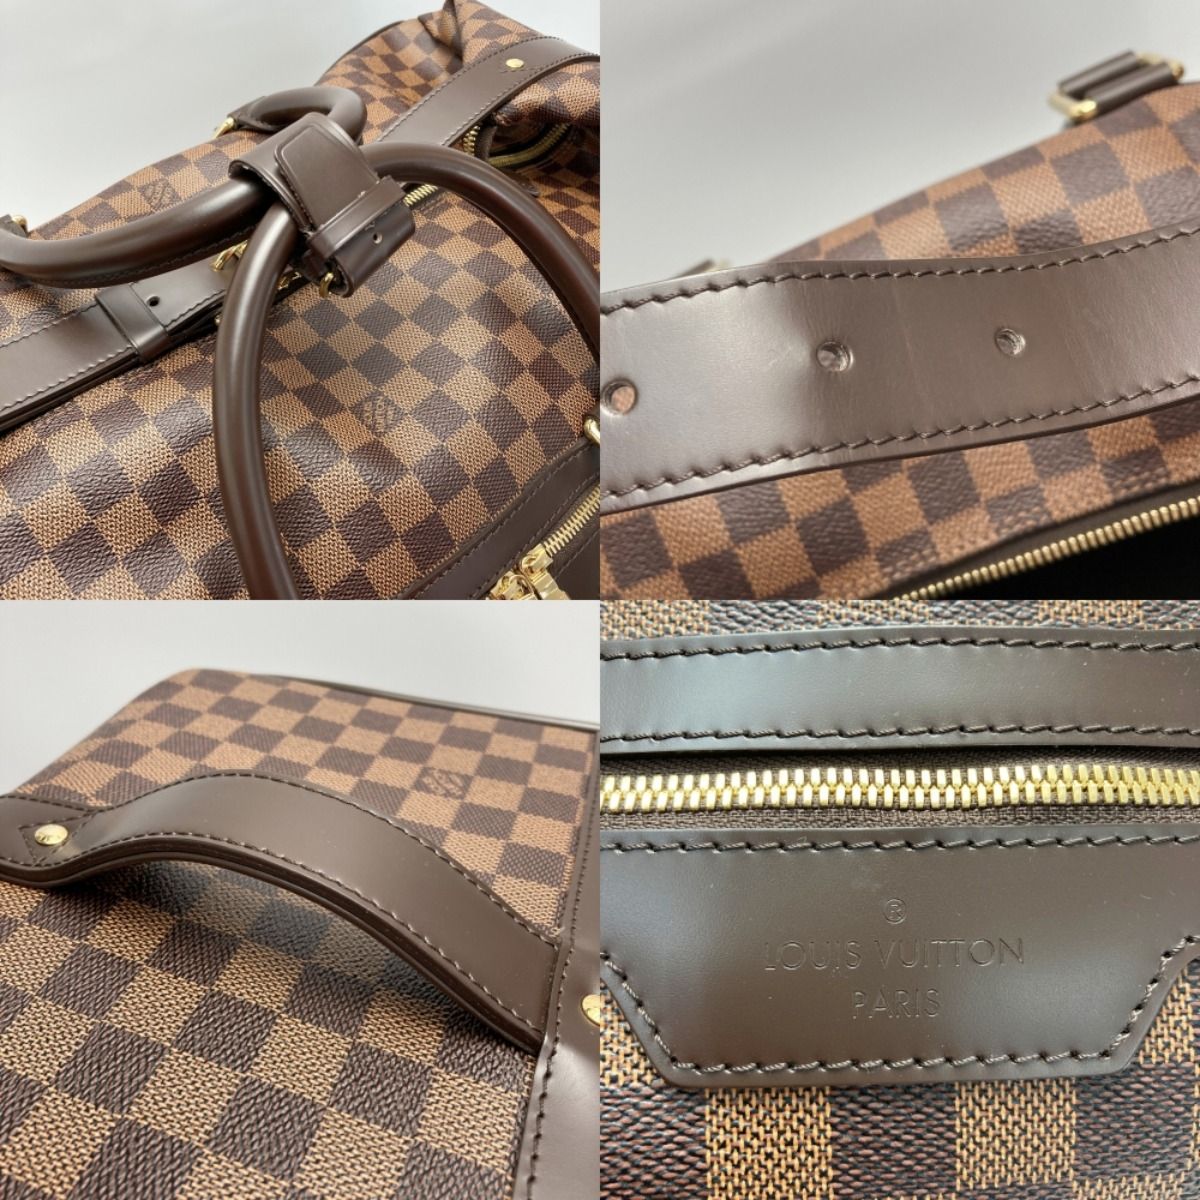 LOUIS VUITTON ルイヴィトン ダミエ エオール50 N23205 キャリーバッグ ...